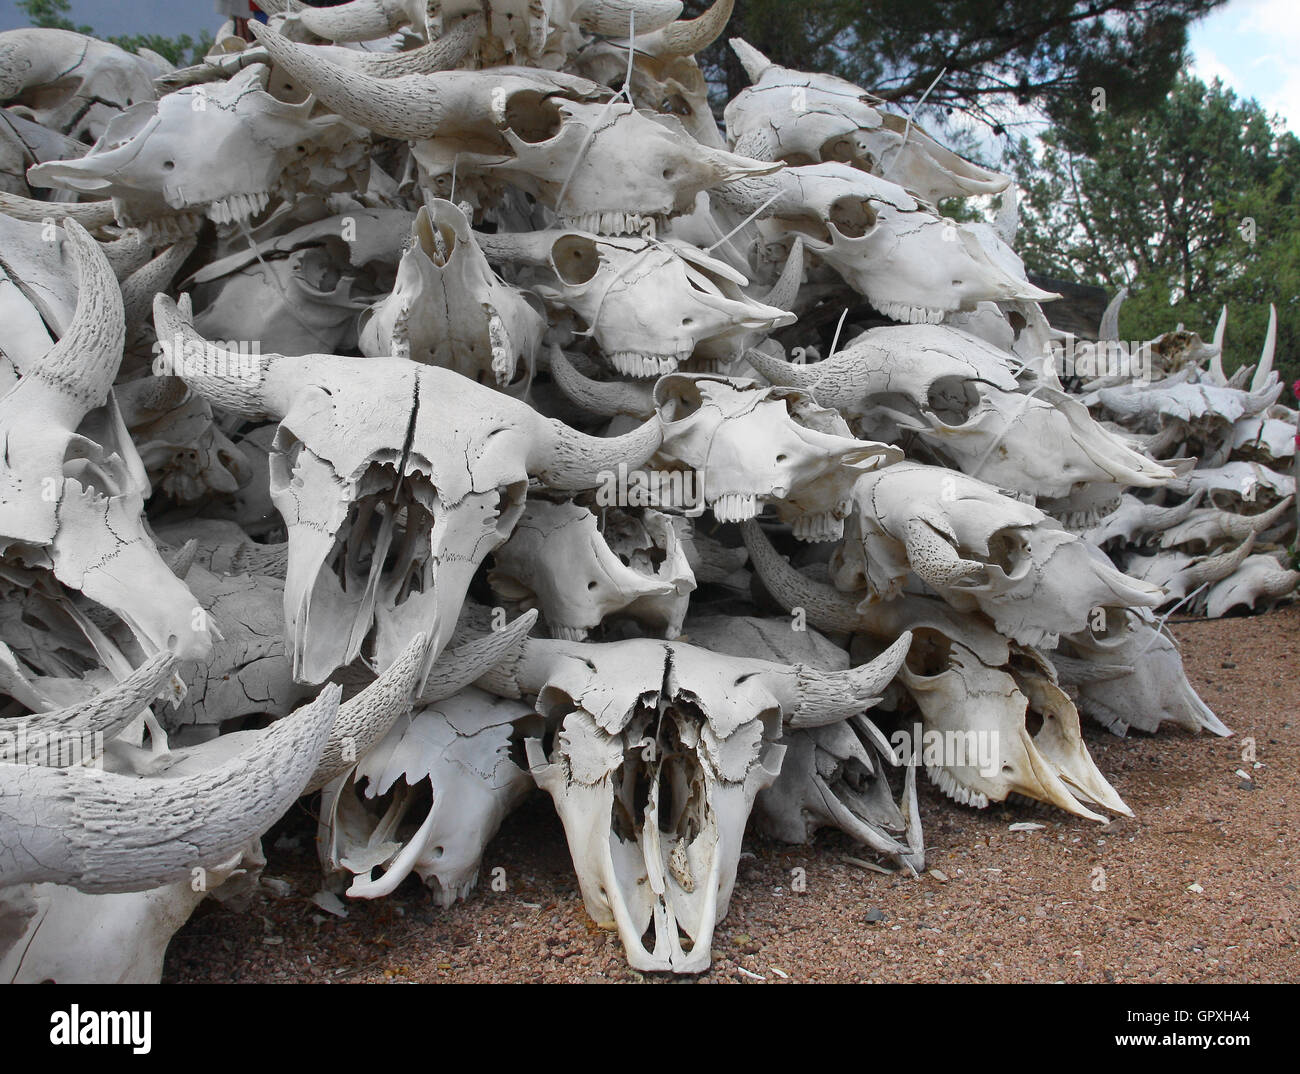 Steer Skulls - Piled High in the Old West (USA) Stock Photo